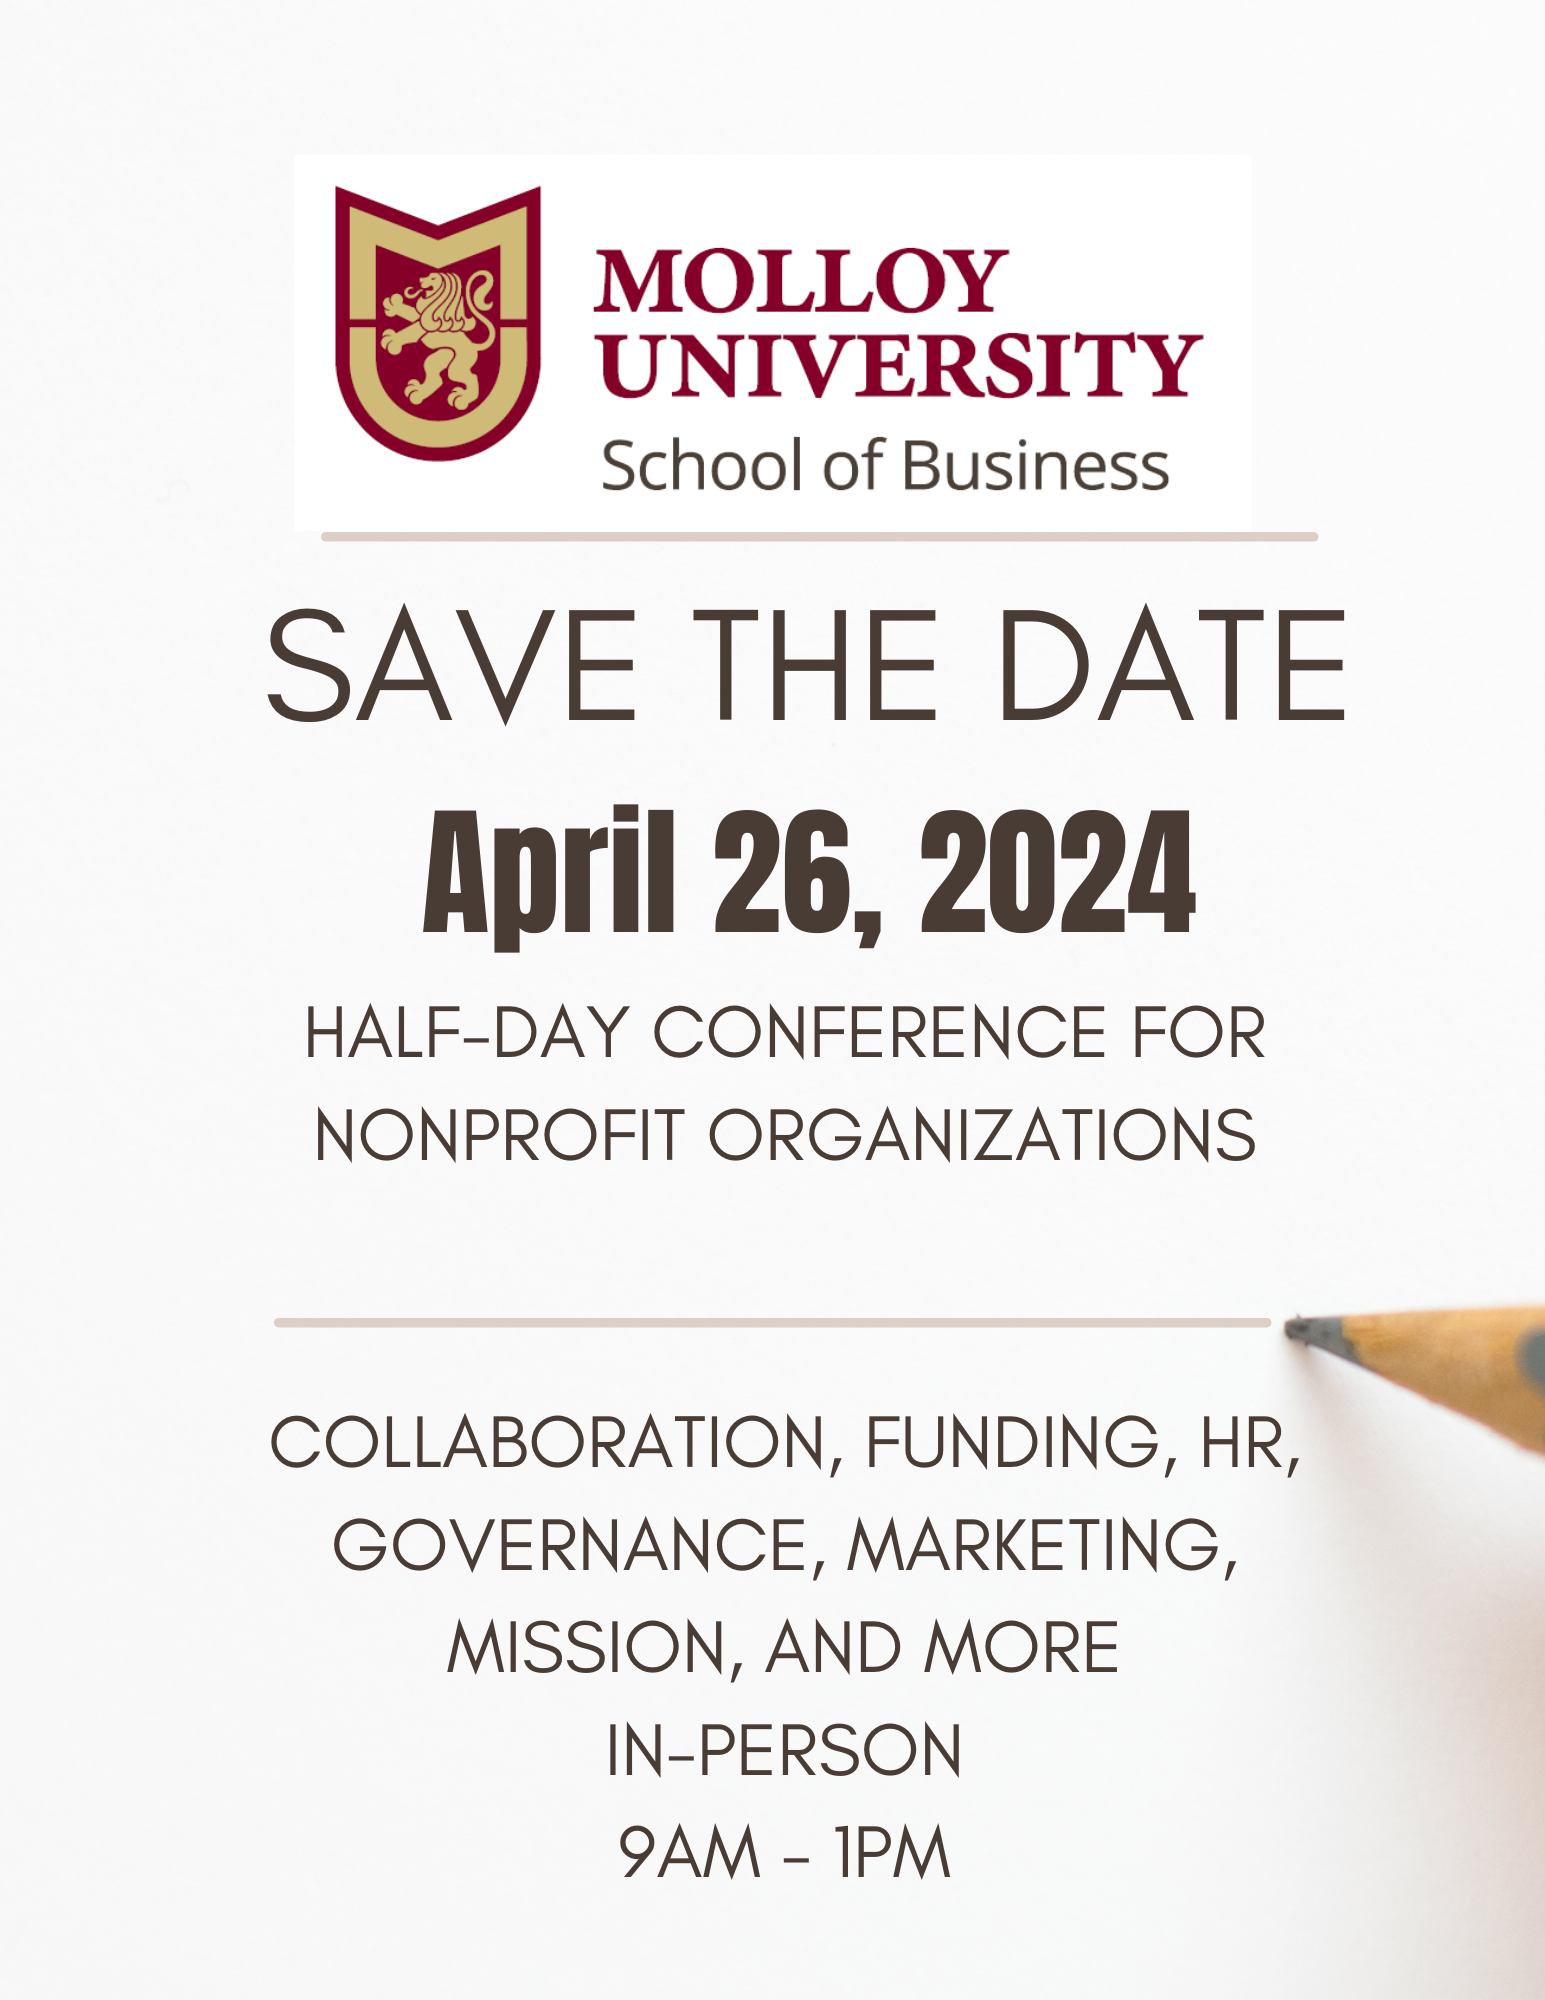 Save the Date: April 26, 2024 for a Half-day Conference for Nonprofits hosted at Molloy